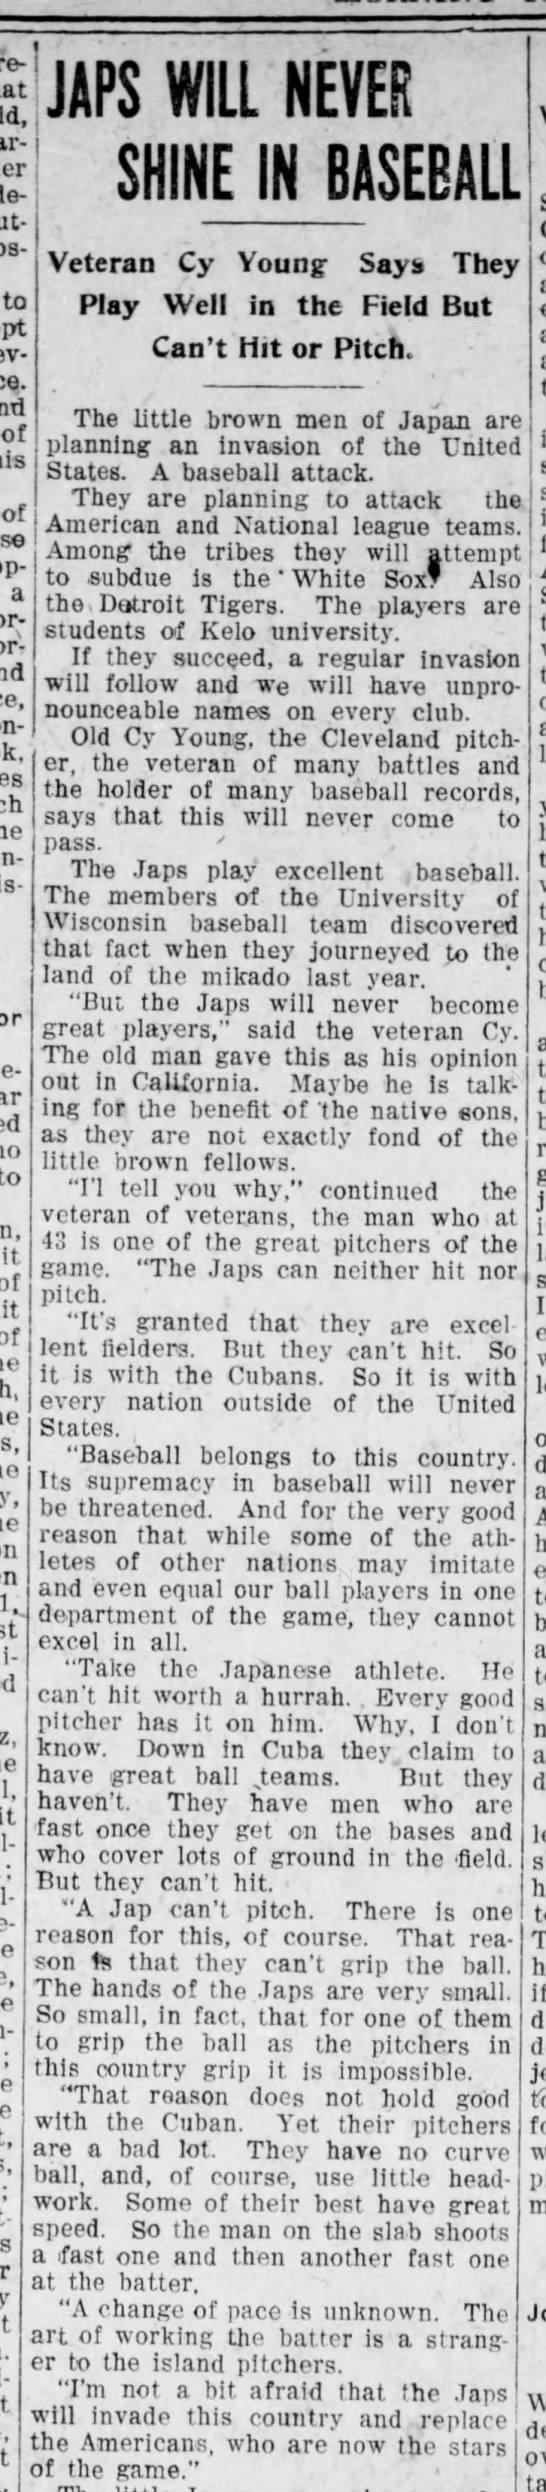 Pitcher Cy Young White Supremacy Statements 1910 - 